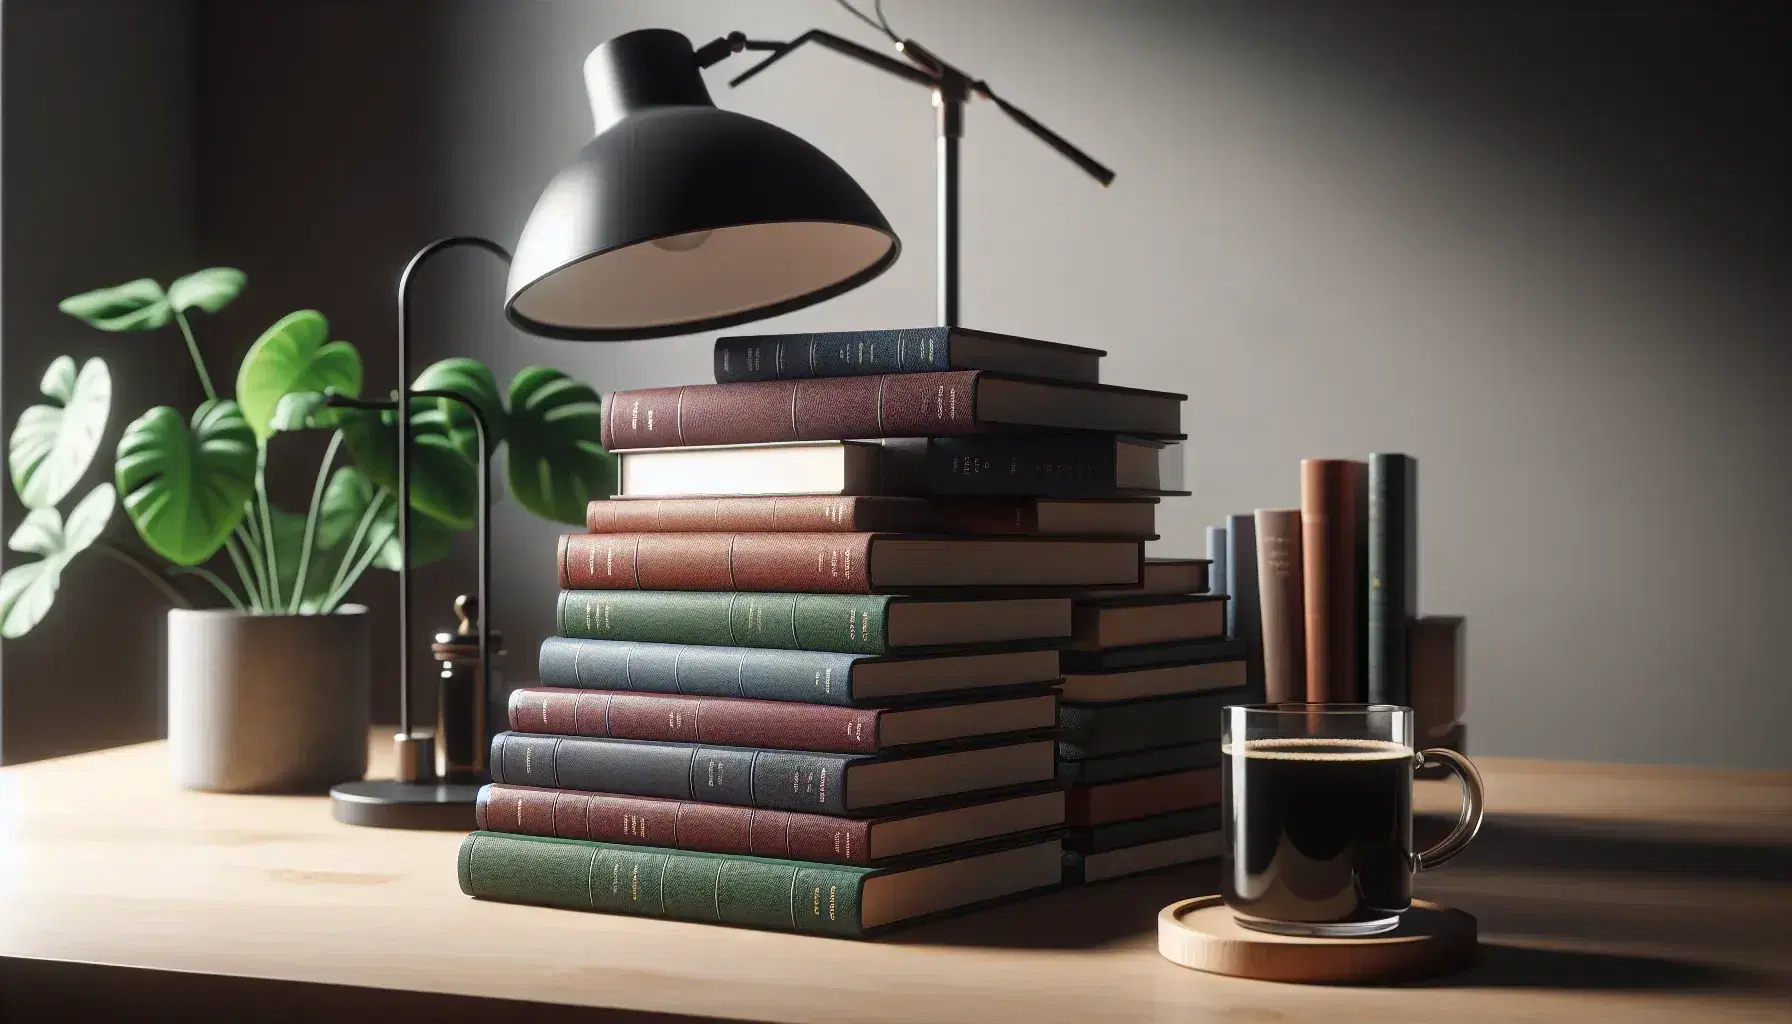 Stack of hardcover books in muted colors on a wooden table, with a black reading lamp and a mug of black coffee beside a green potted plant.